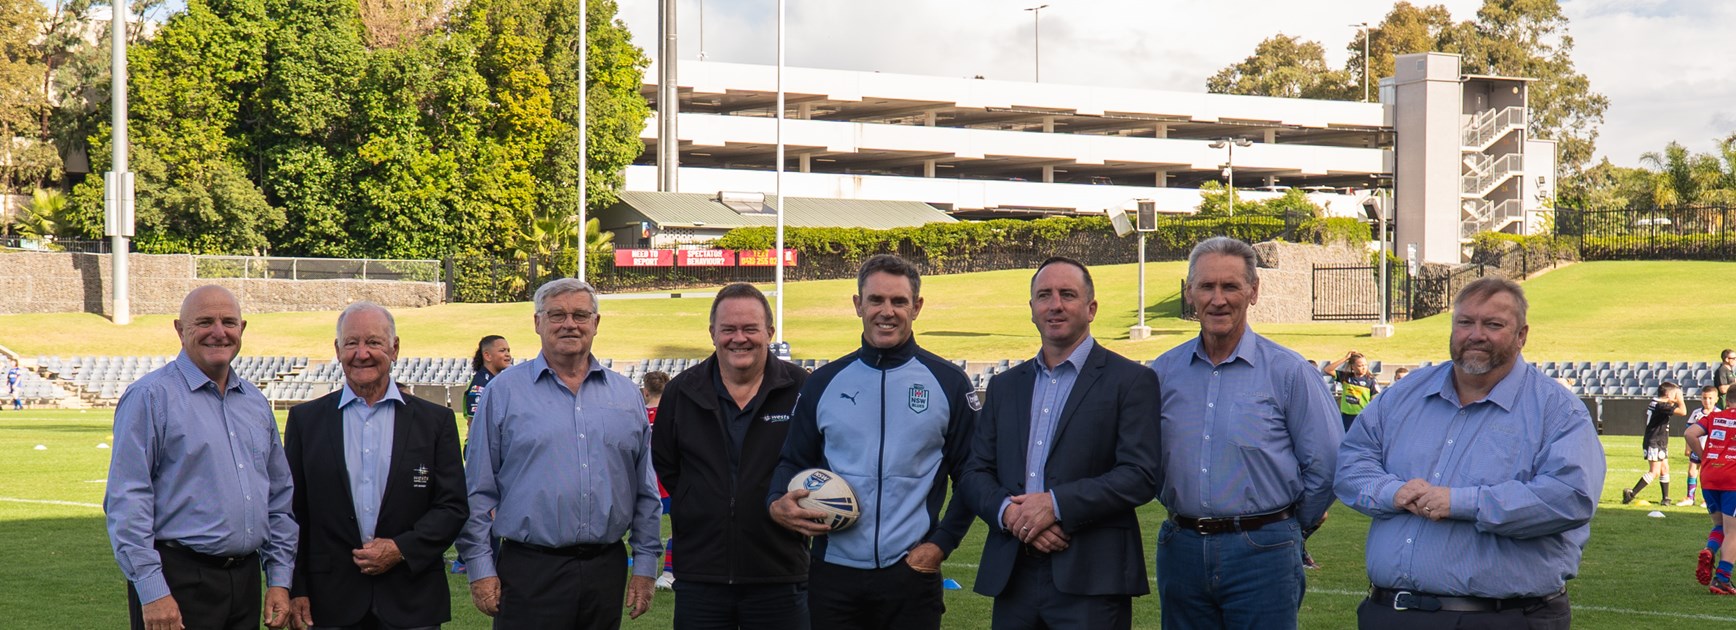 NSWRL and Wests Group Macarthur extend partnership benefitting 500 teams